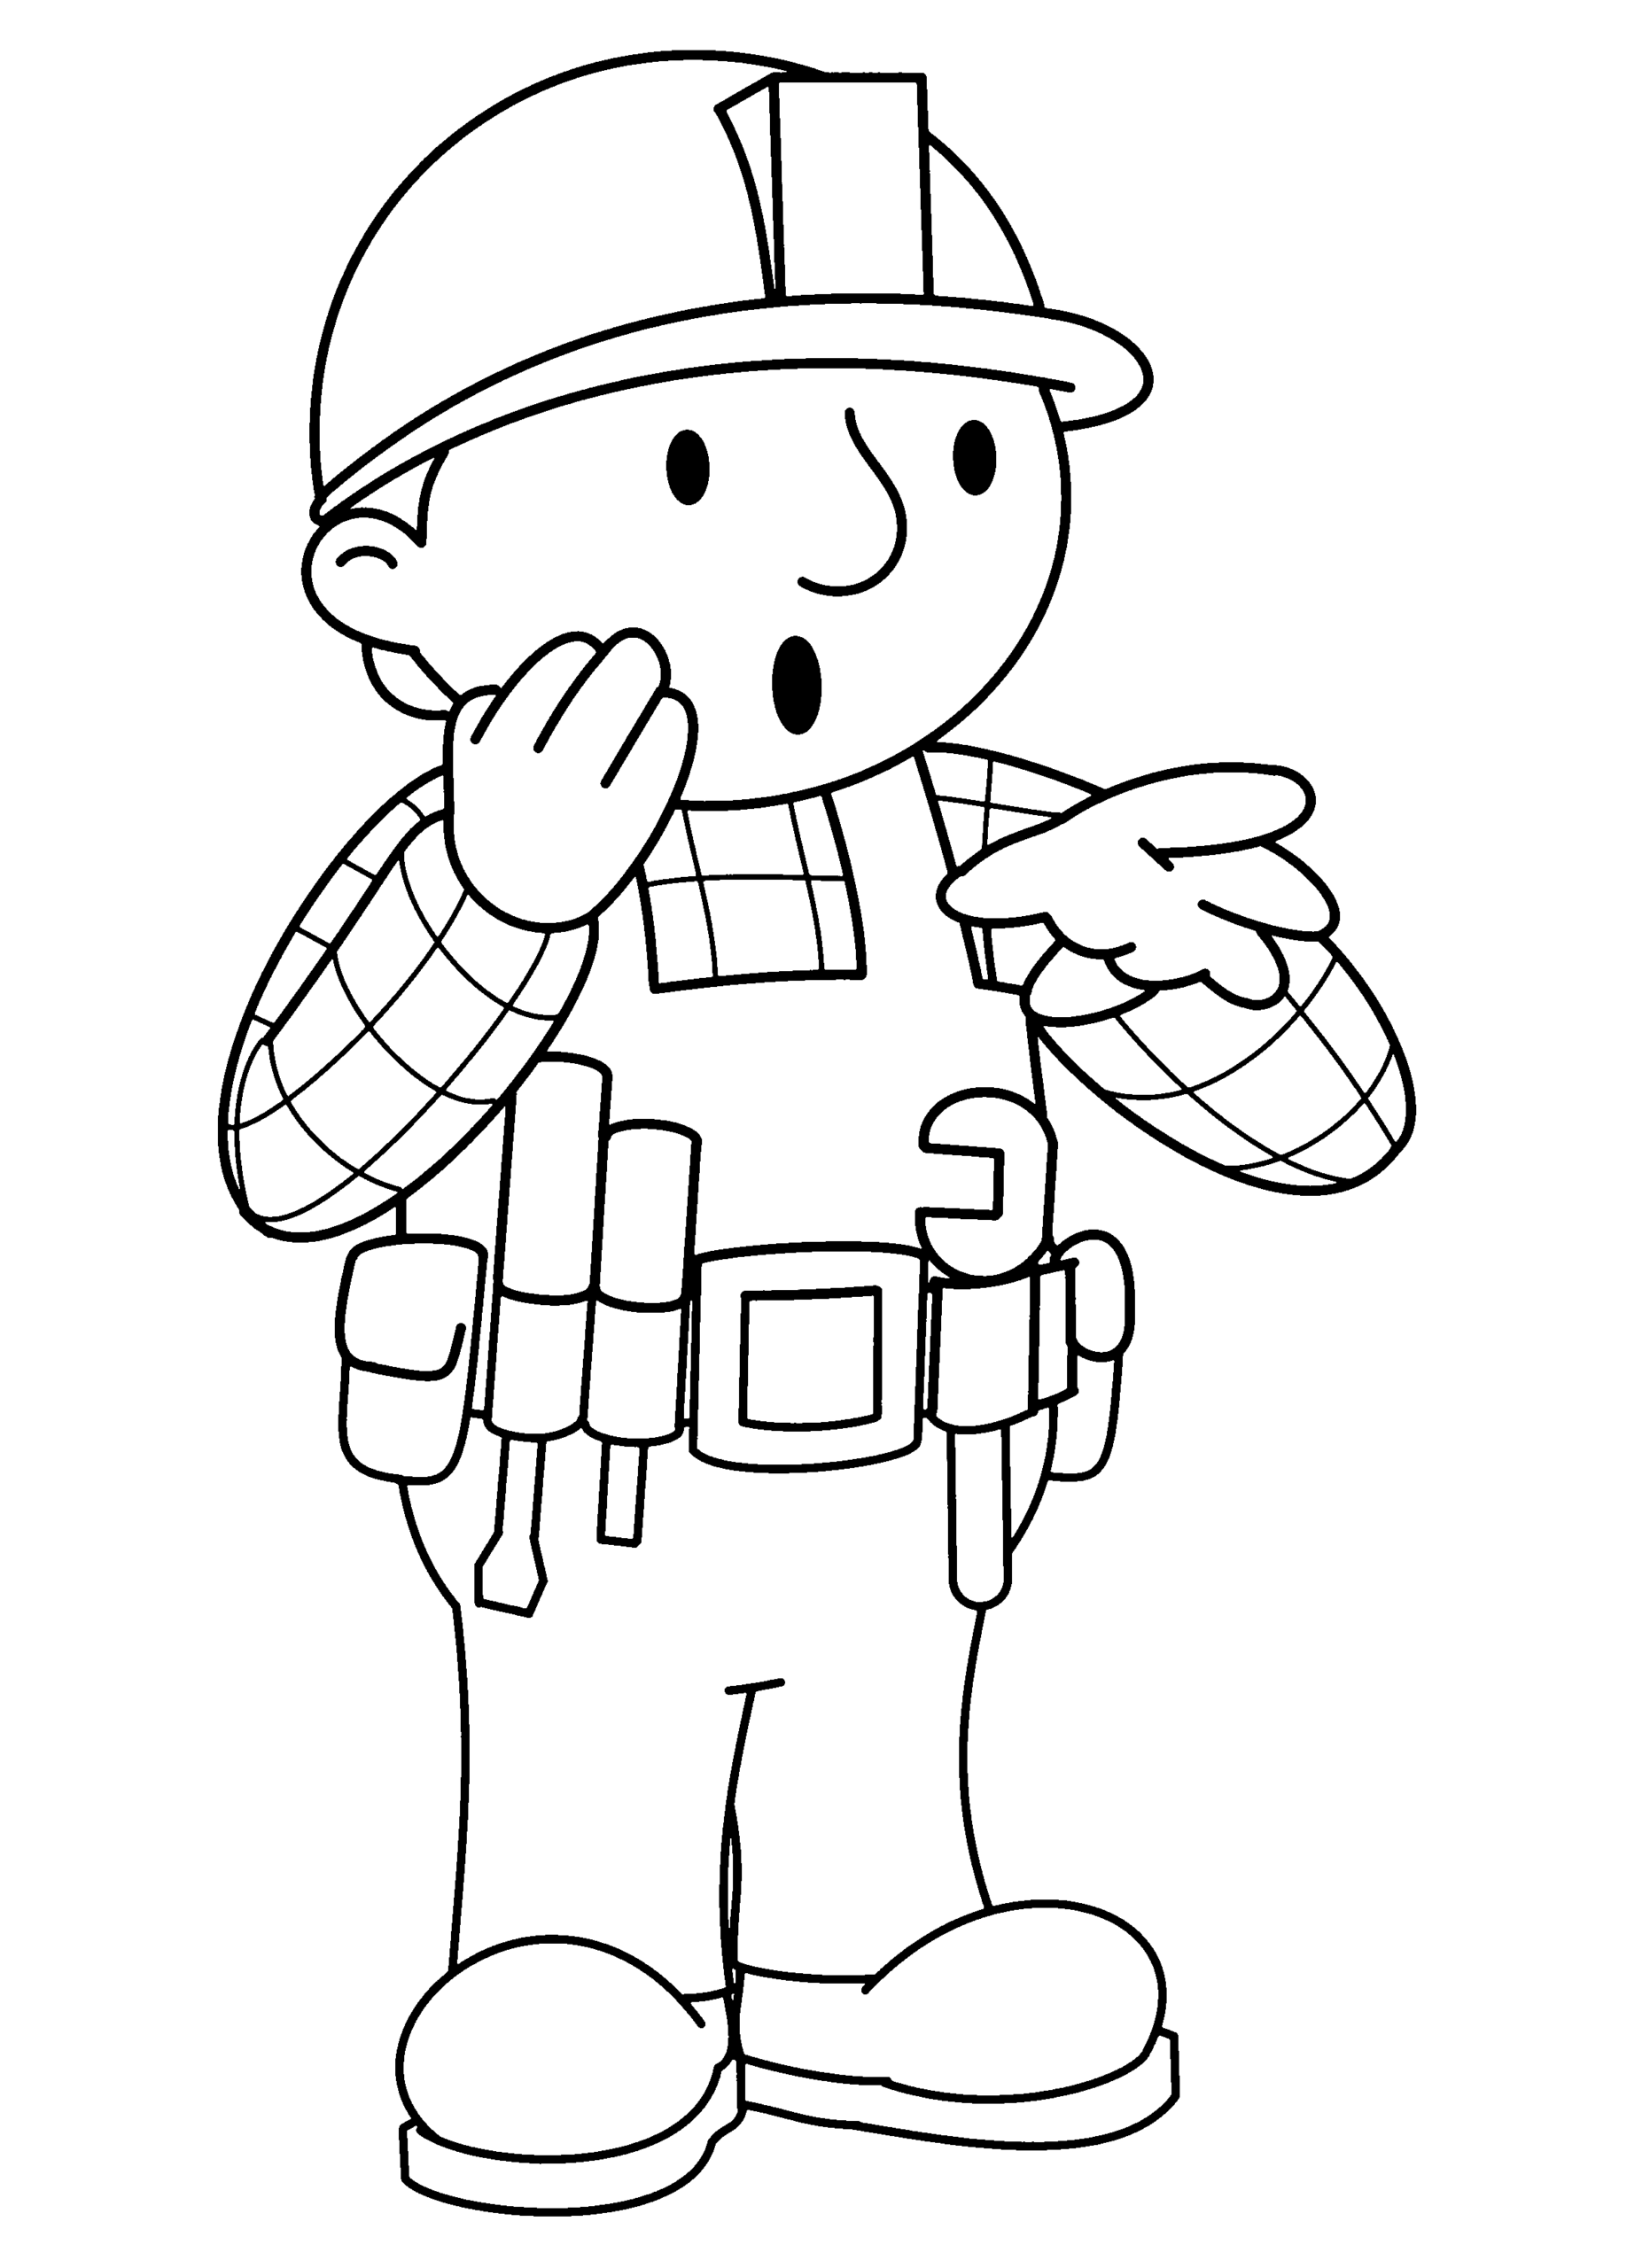 Bob the Builder Coloring Pages TV Film bob the builder 67 Printable 2020 01089 Coloring4free